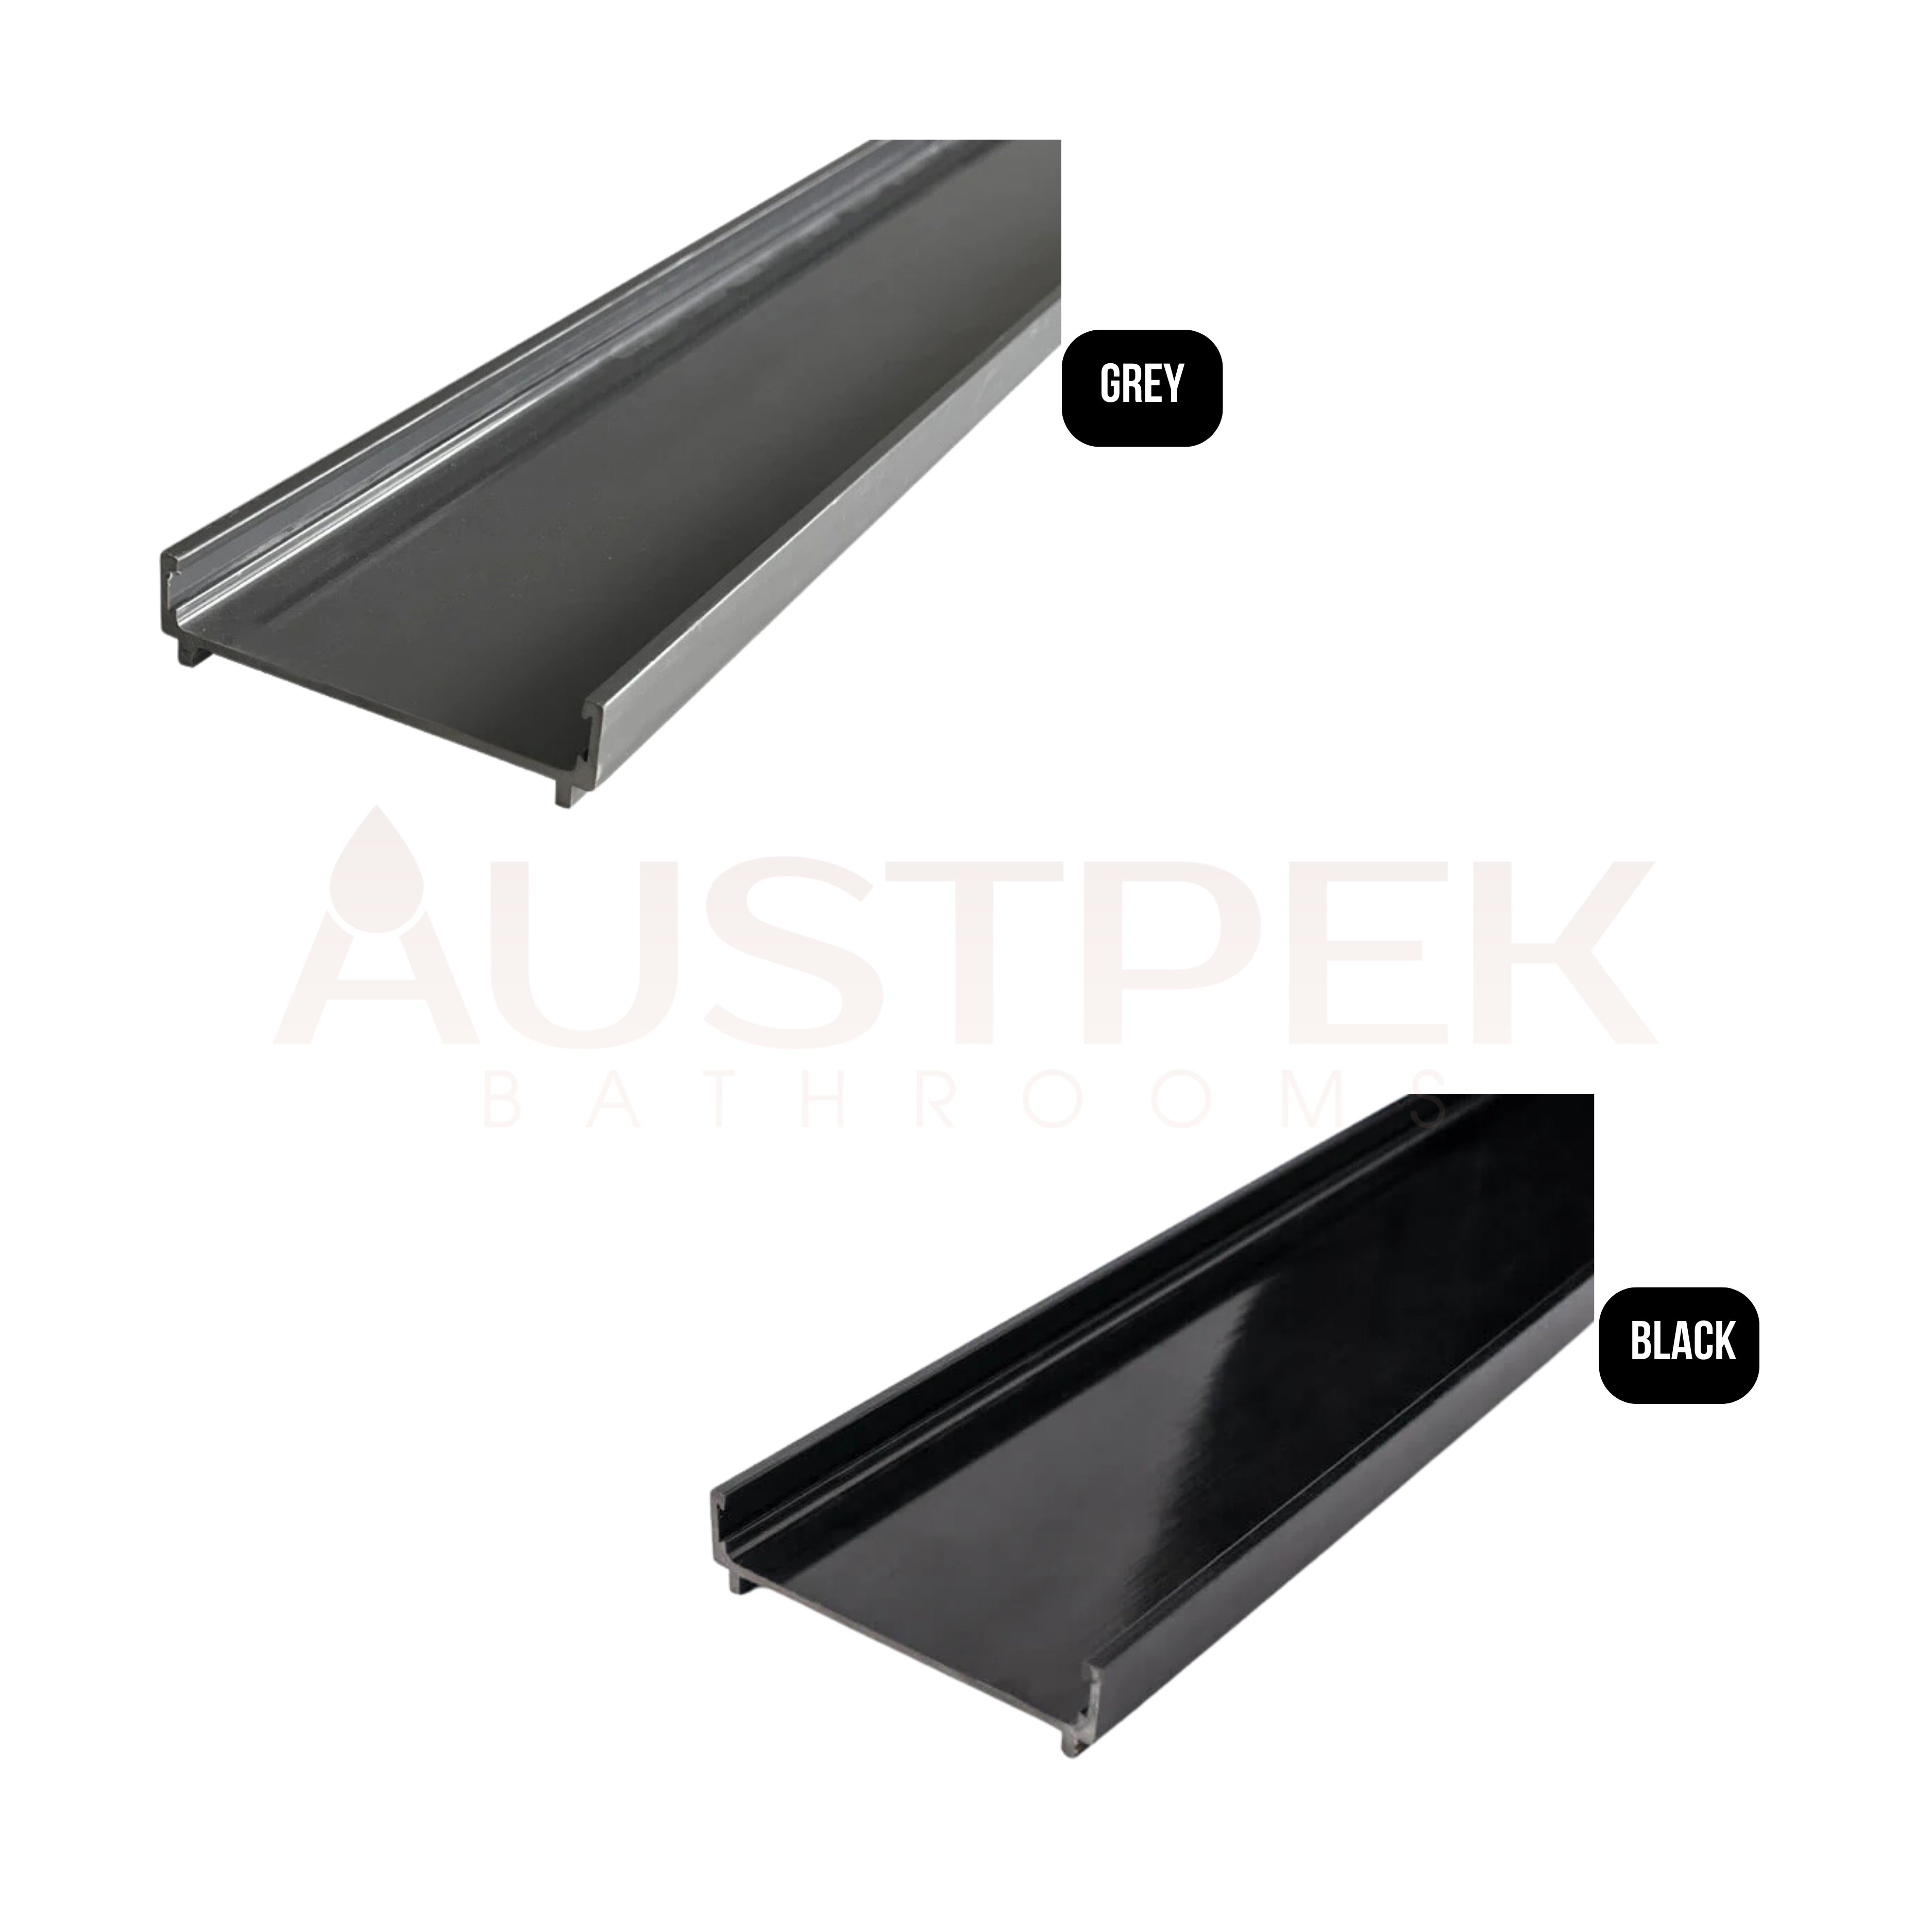 GRATES2GO UPVC TILE INSERT CHANNEL TRAY GREY 1000MM, 1250MM AND 1500MM